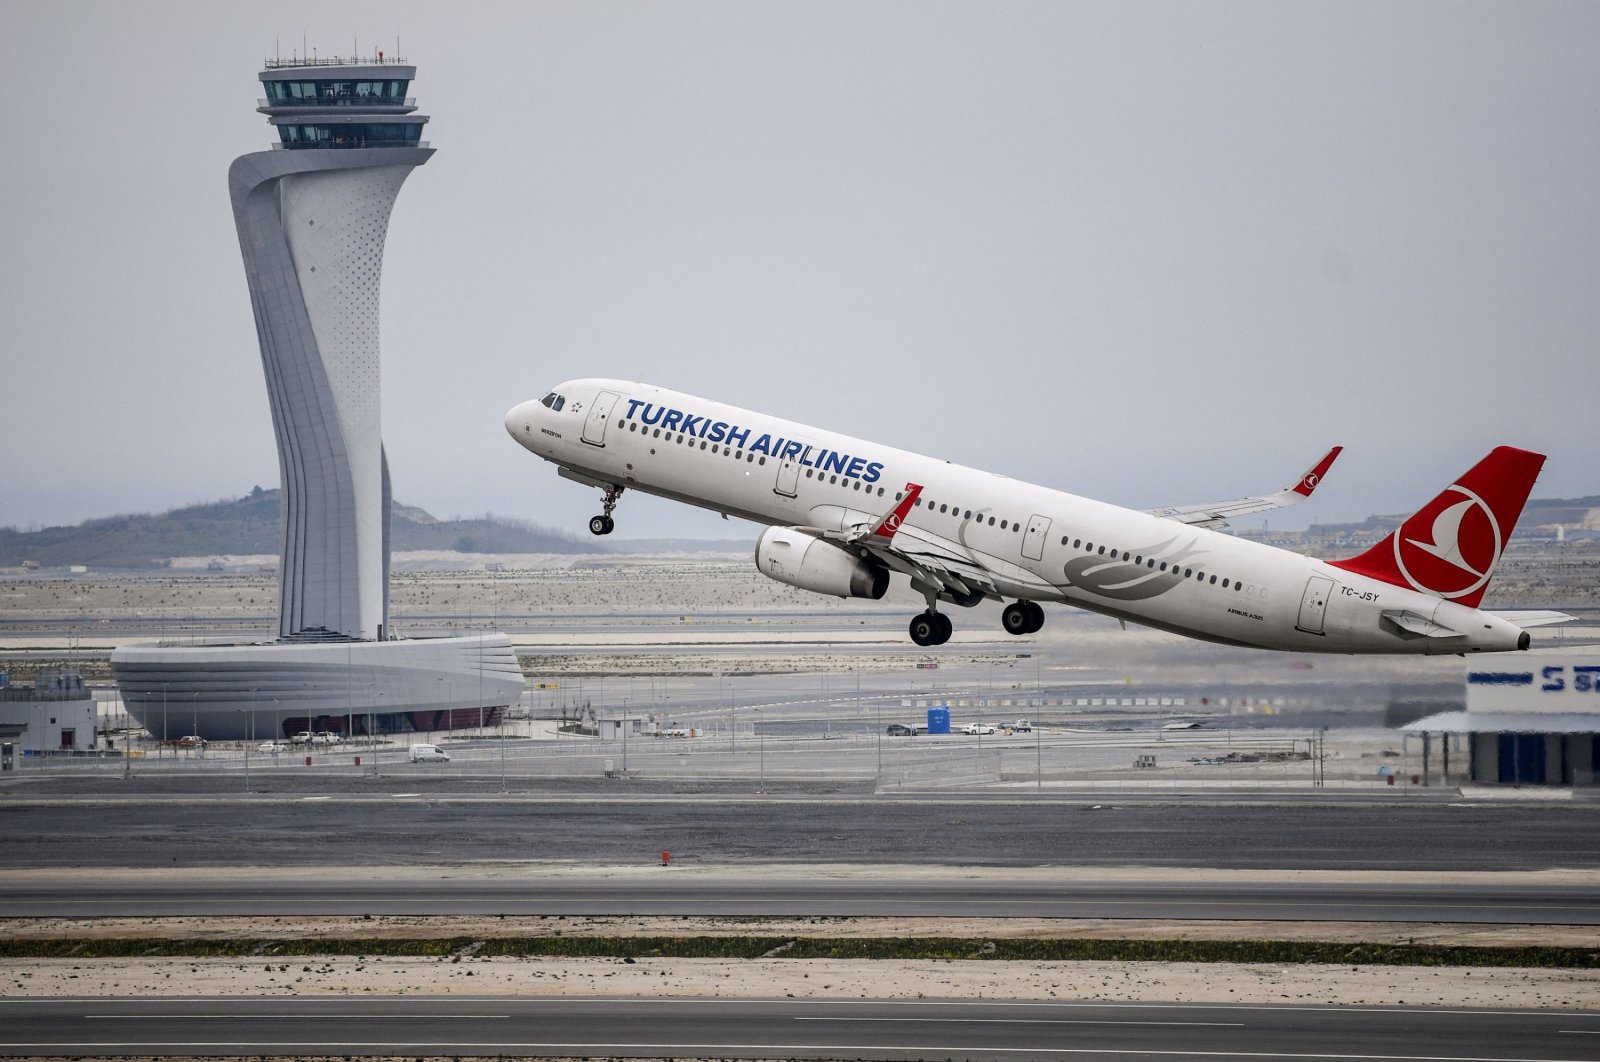 A Turkish Airlines Airbus A321 plane takes off in front of the control tower at Istanbul Airport, Istanbul, Türkiye, April 6, 2019. (AFP Photo)